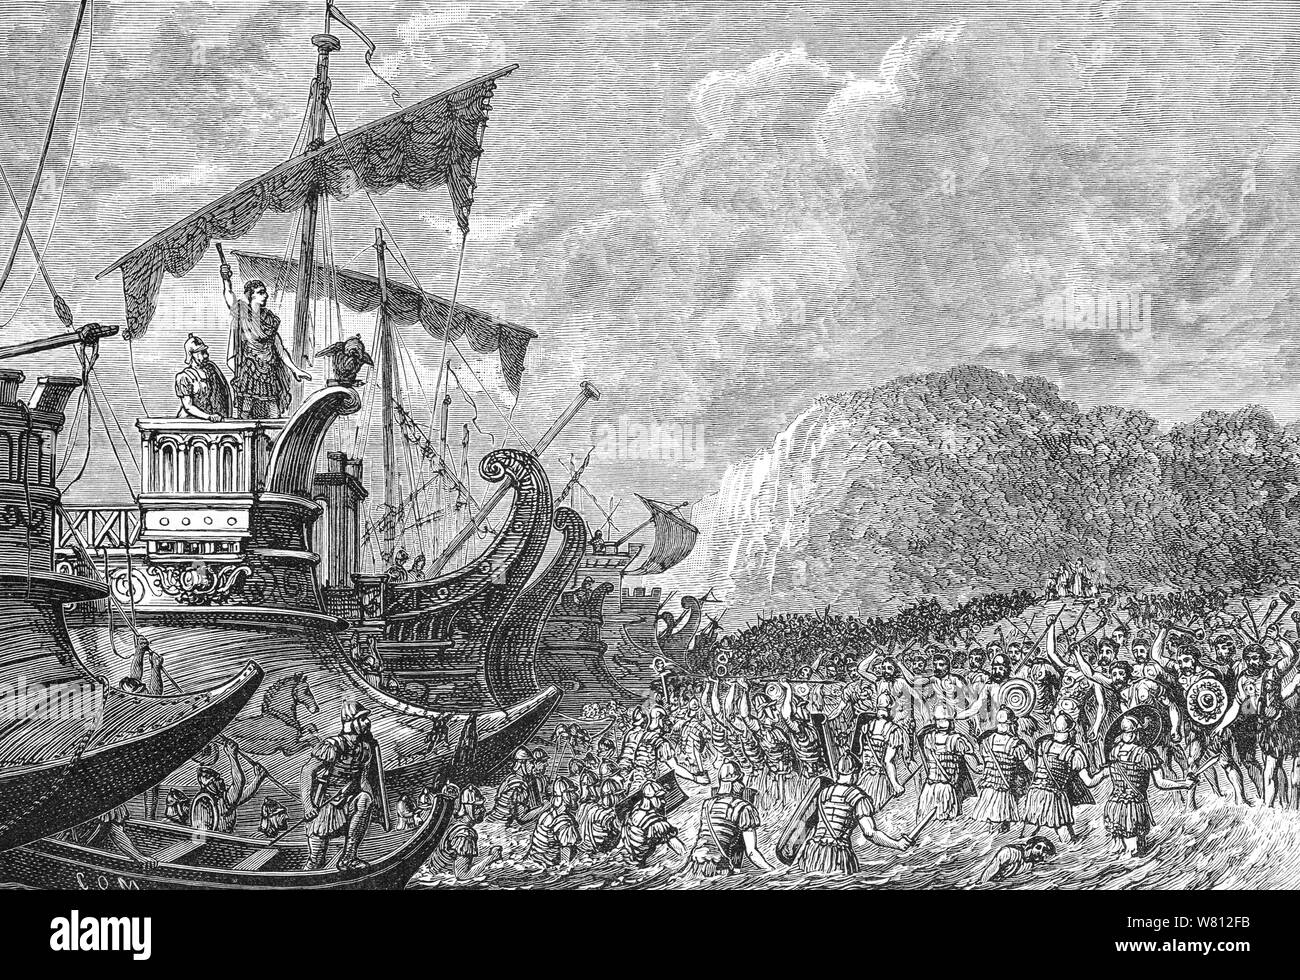 In 55 BC, Julius Caesar decided to make an expedition to Britain. He gathered a fleet consisting of eighty transport ships, sufficient to carry two legions, that he initially tried to land at Dubris (Dover), a natural harbour identified as a suitable landing place. However, when he came in sight of shore, the massed forces of the Britons gathered on the overlooking hills and cliffs dissuaded him from landing and the fleet sailed along the coast to an open beach. Having been tracked all the way along the coast by the British cavalry and chariots, the landing was opposed. To make matters worse, Stock Photo